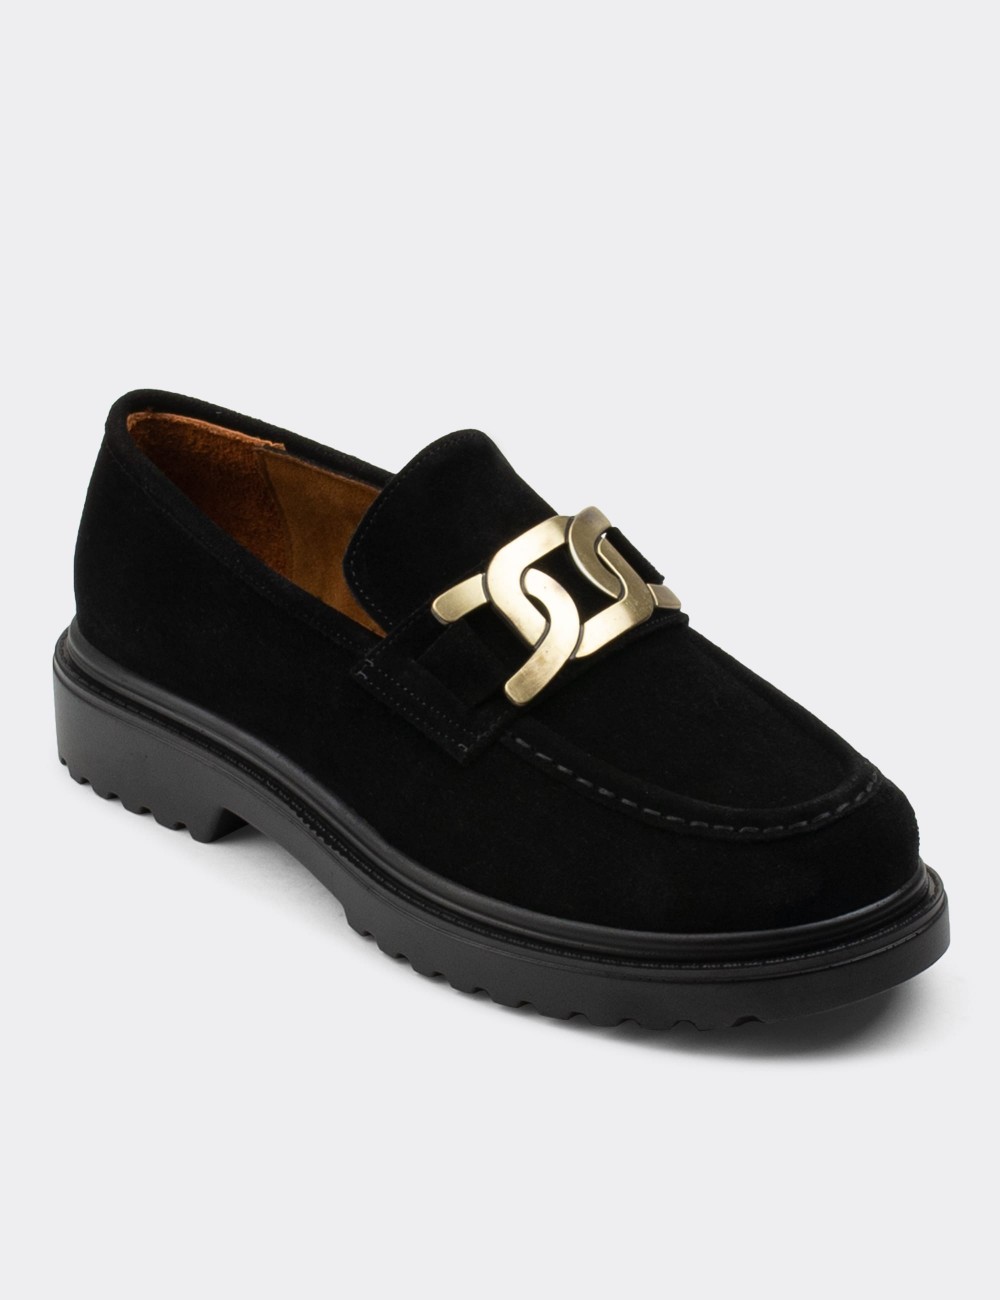 Black Suede Leather Loafers - 01902ZSYHP01